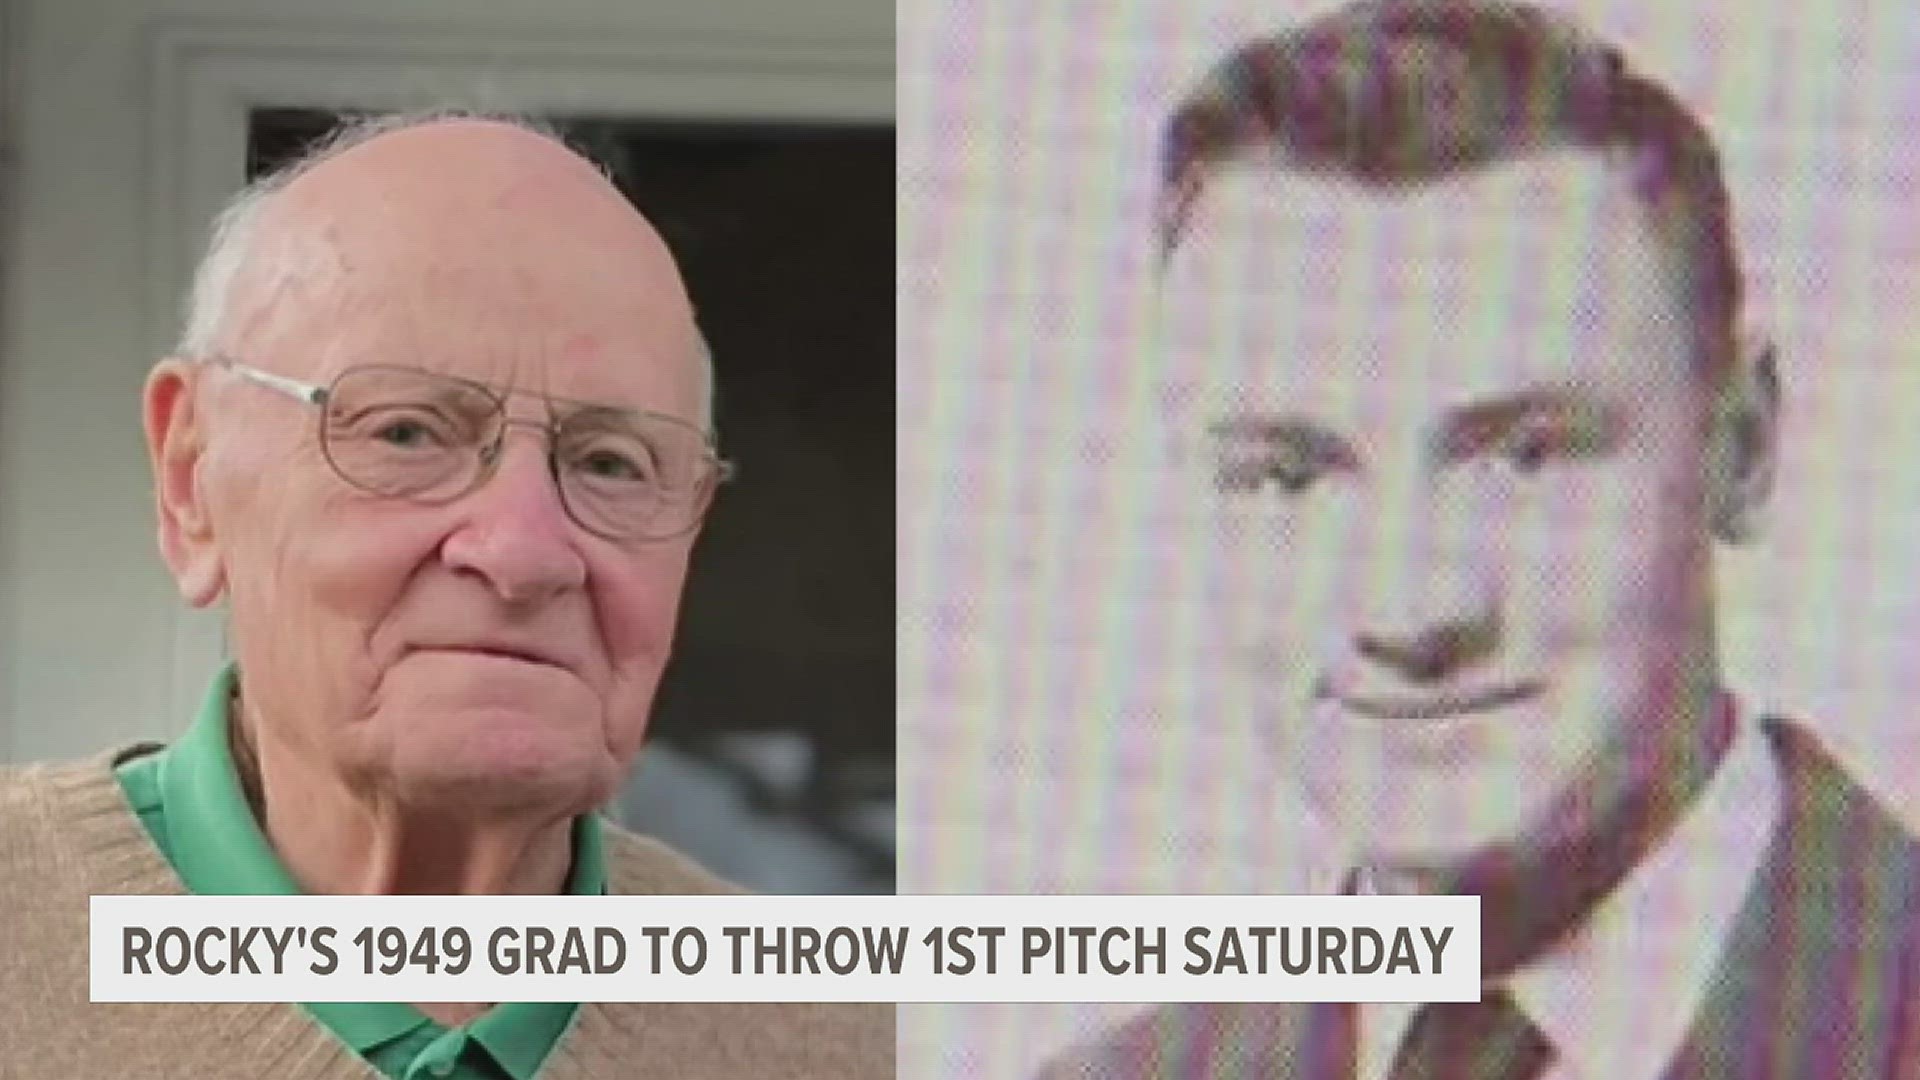 News 8's Jon Diaz spoke with Mary Johnson, the daughter of the oldest living RIHS baseball player, Frank Edwards.